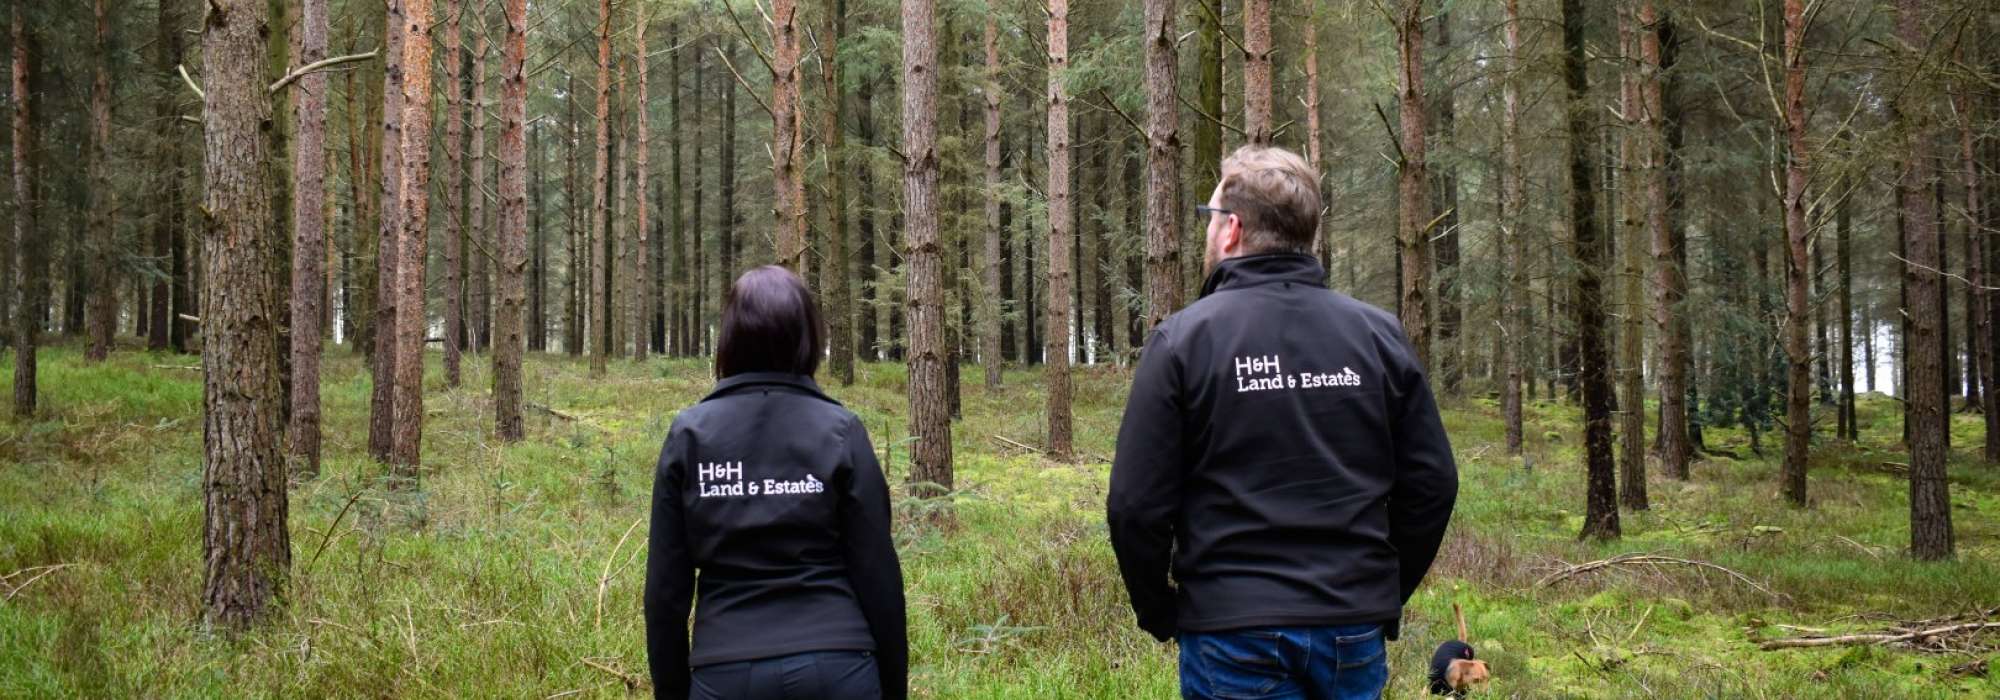 Our Forestry team stood with their backs to the camera in a woodland, wearing their H&H Land & Estates branded jackets.